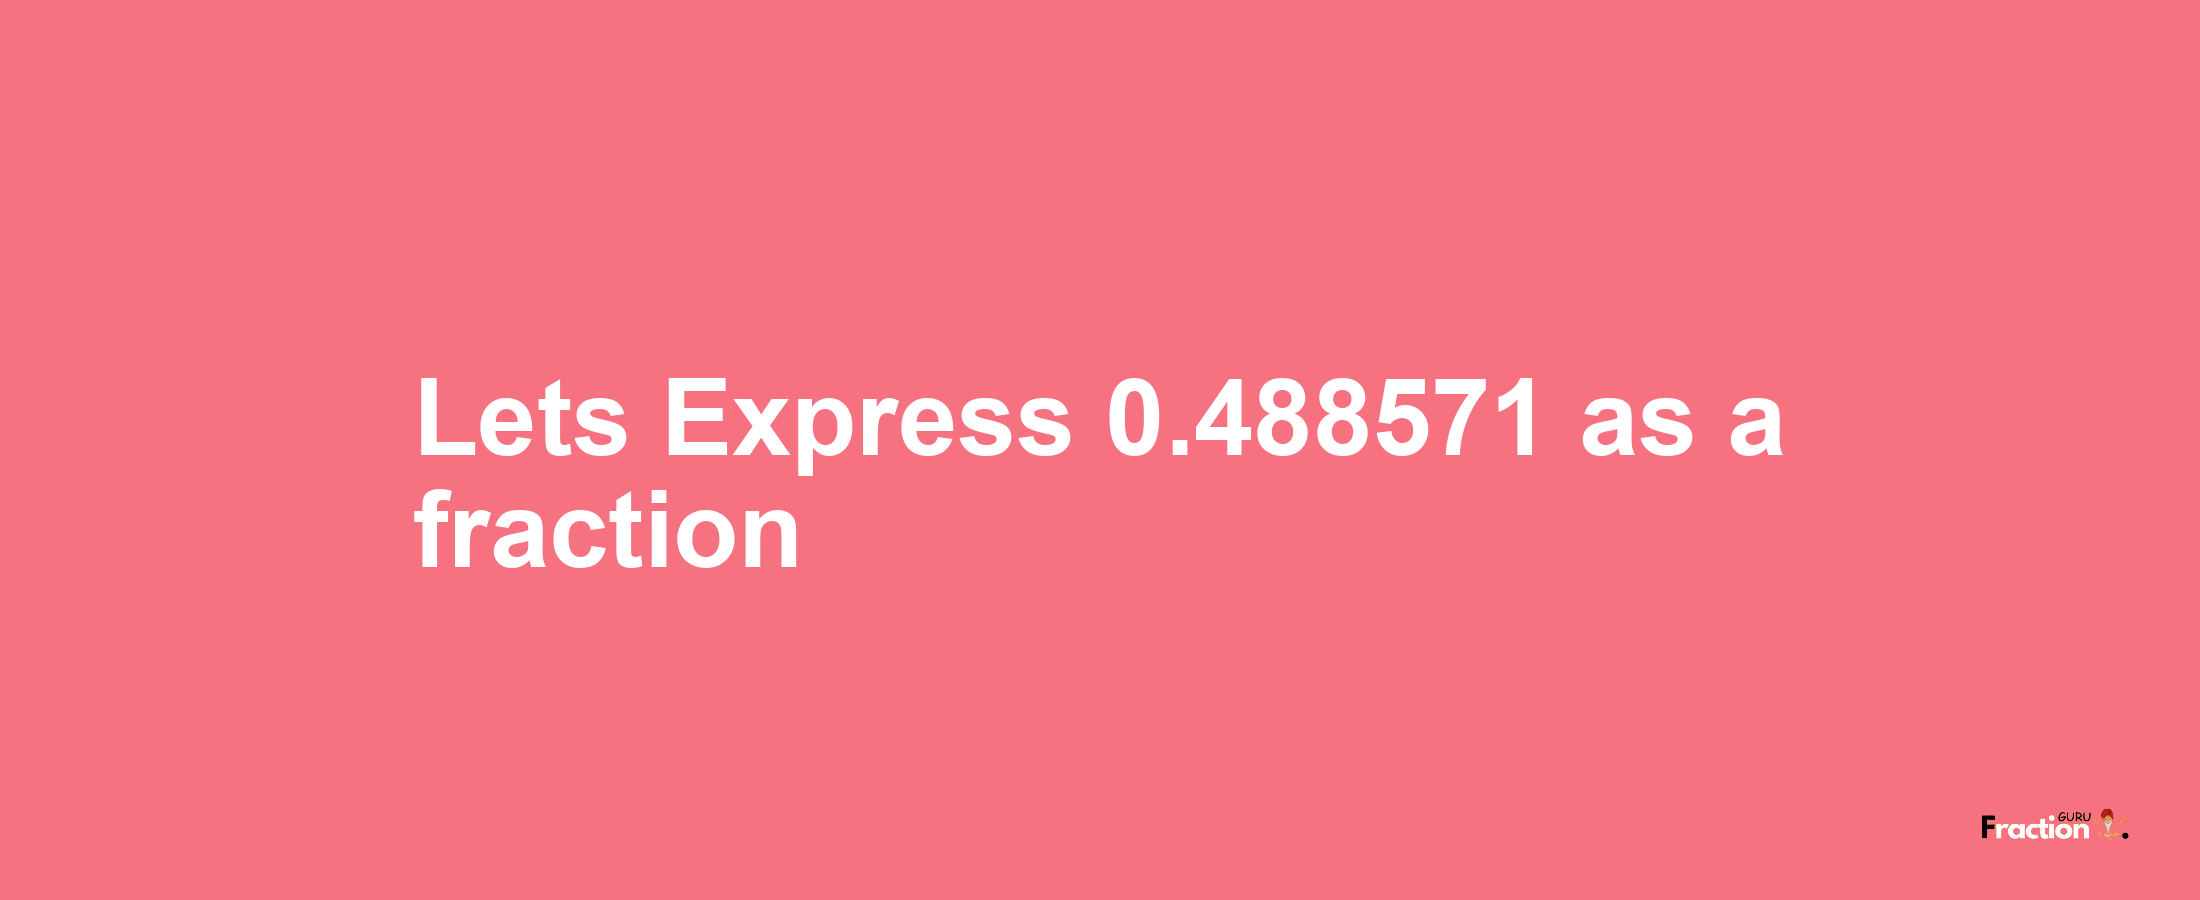 Lets Express 0.488571 as afraction